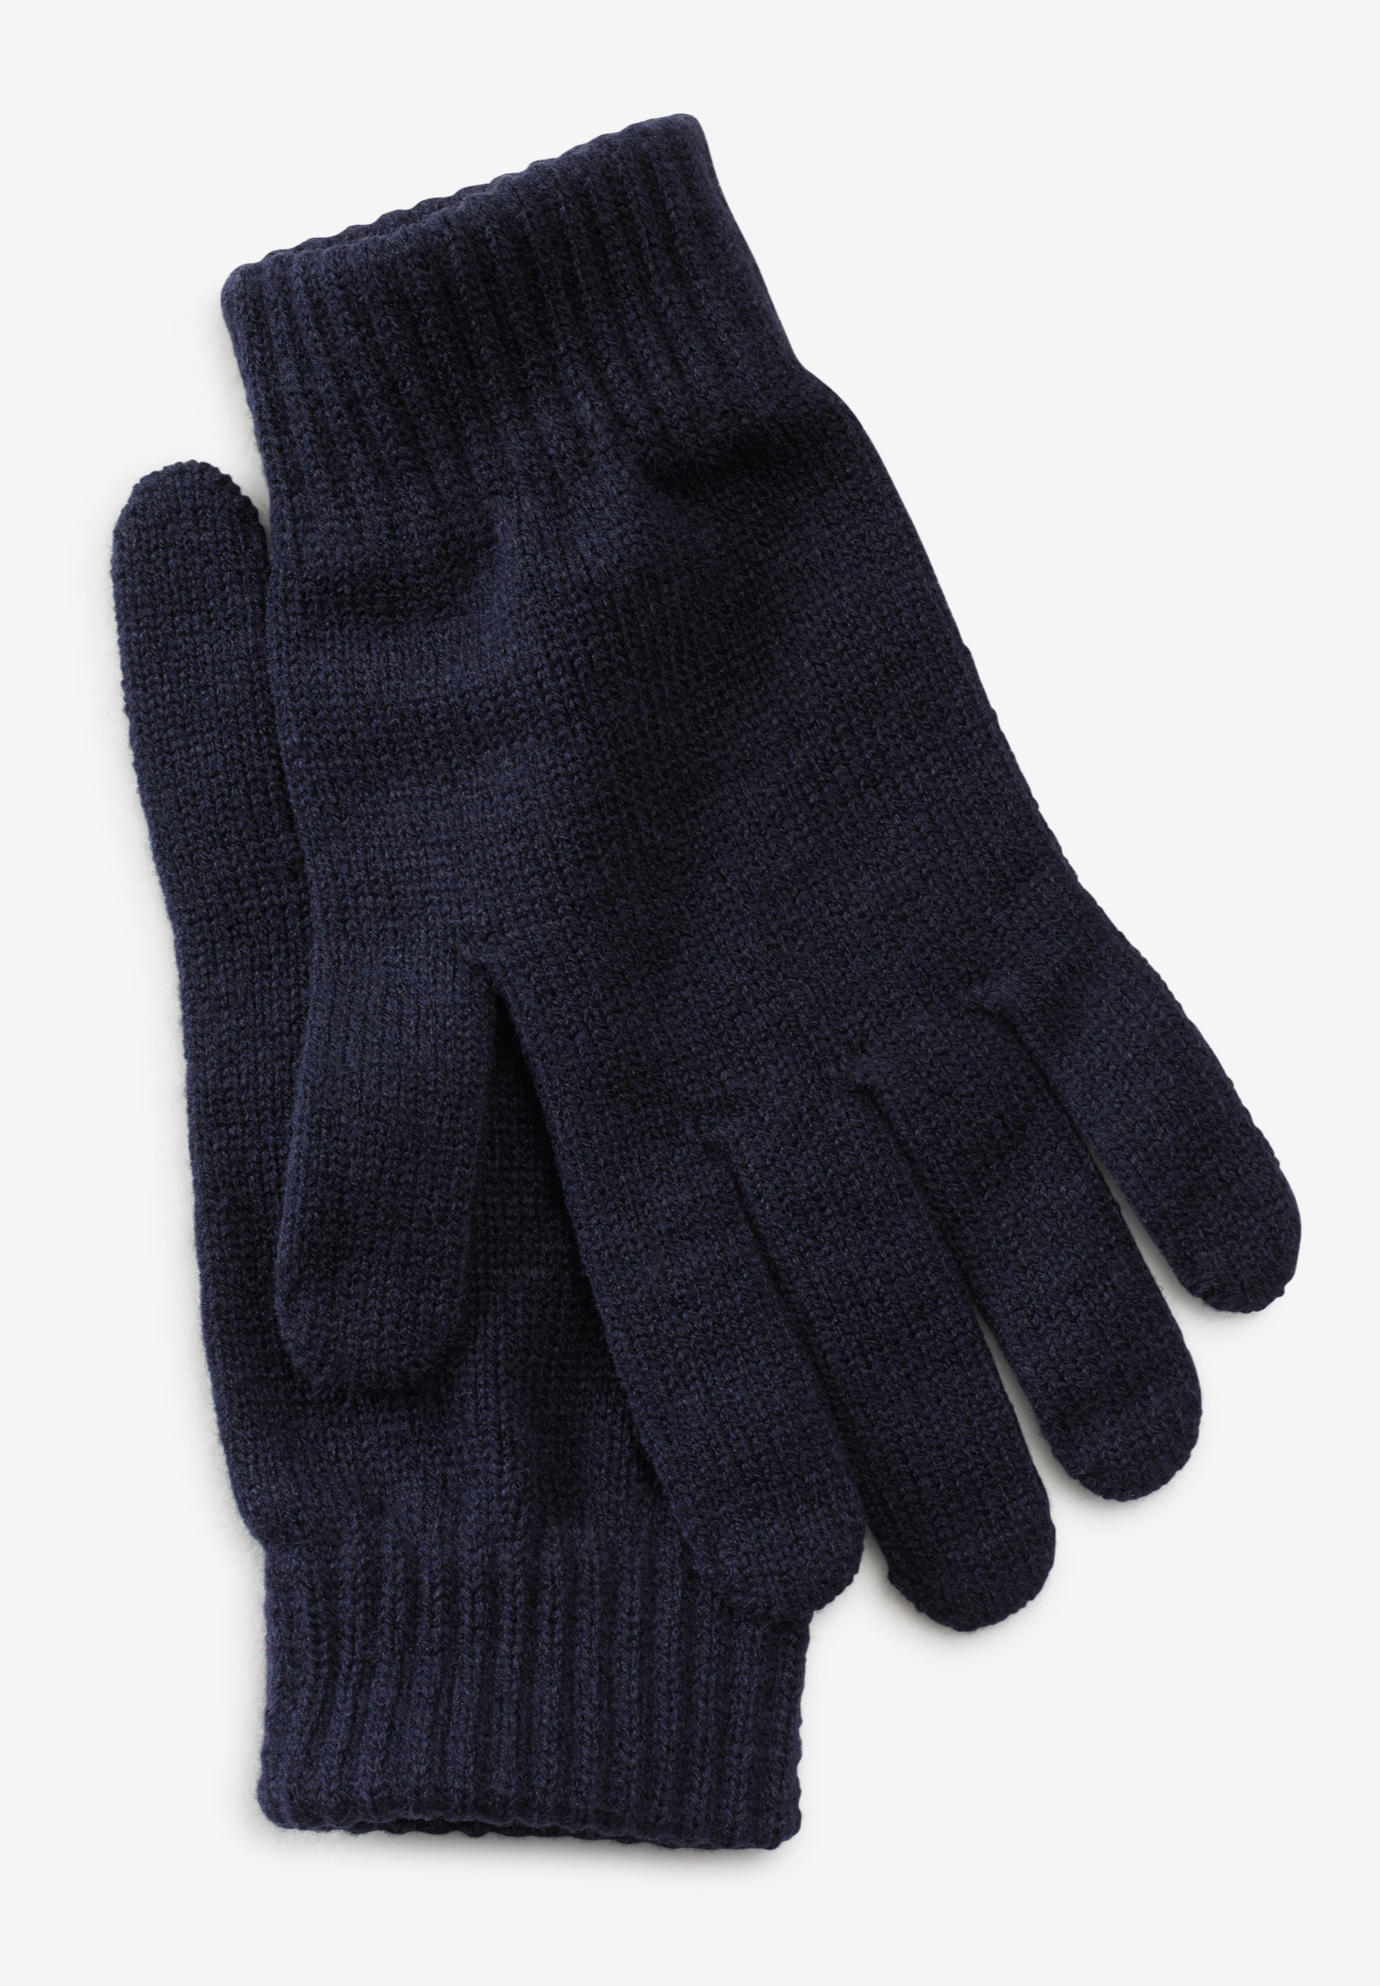 extra large knit gloves, 